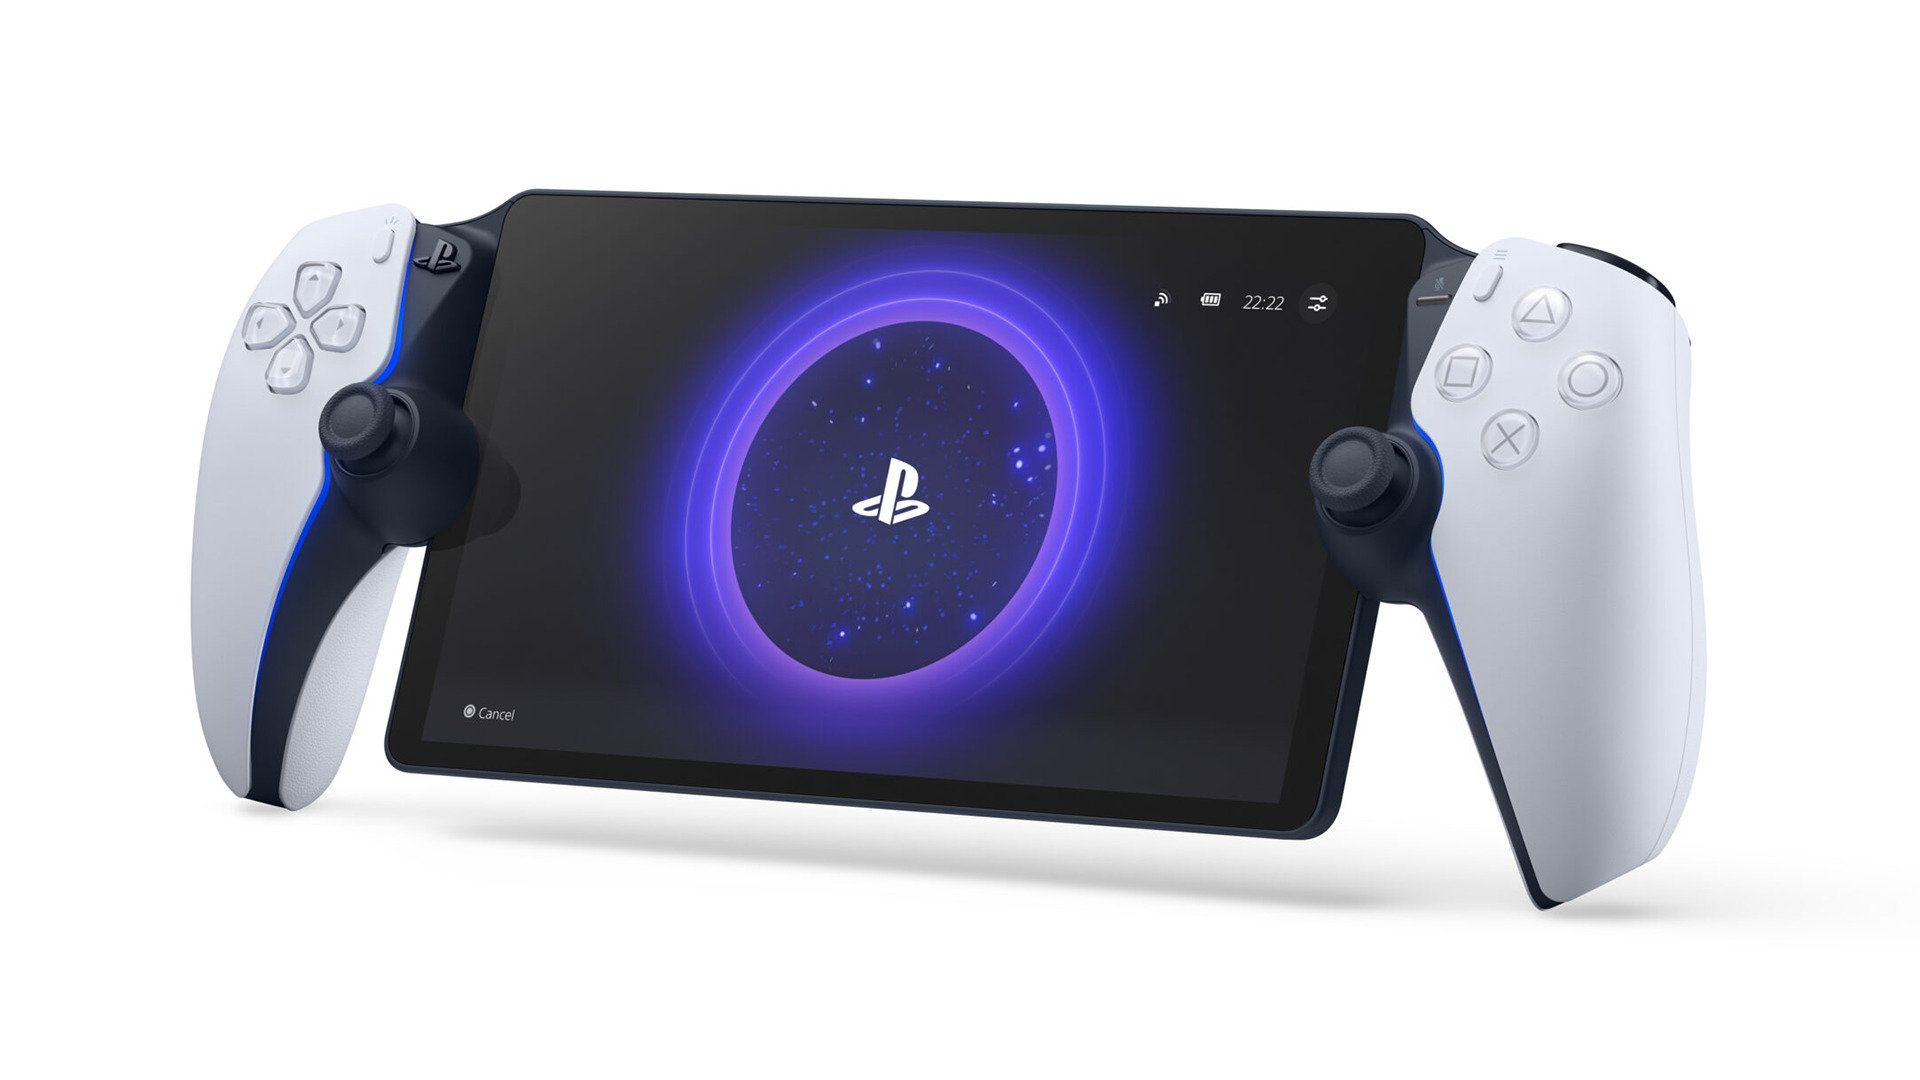 Sony Reveals What's in the PS5 DualSense Edge Controller Box - PlayStation  LifeStyle